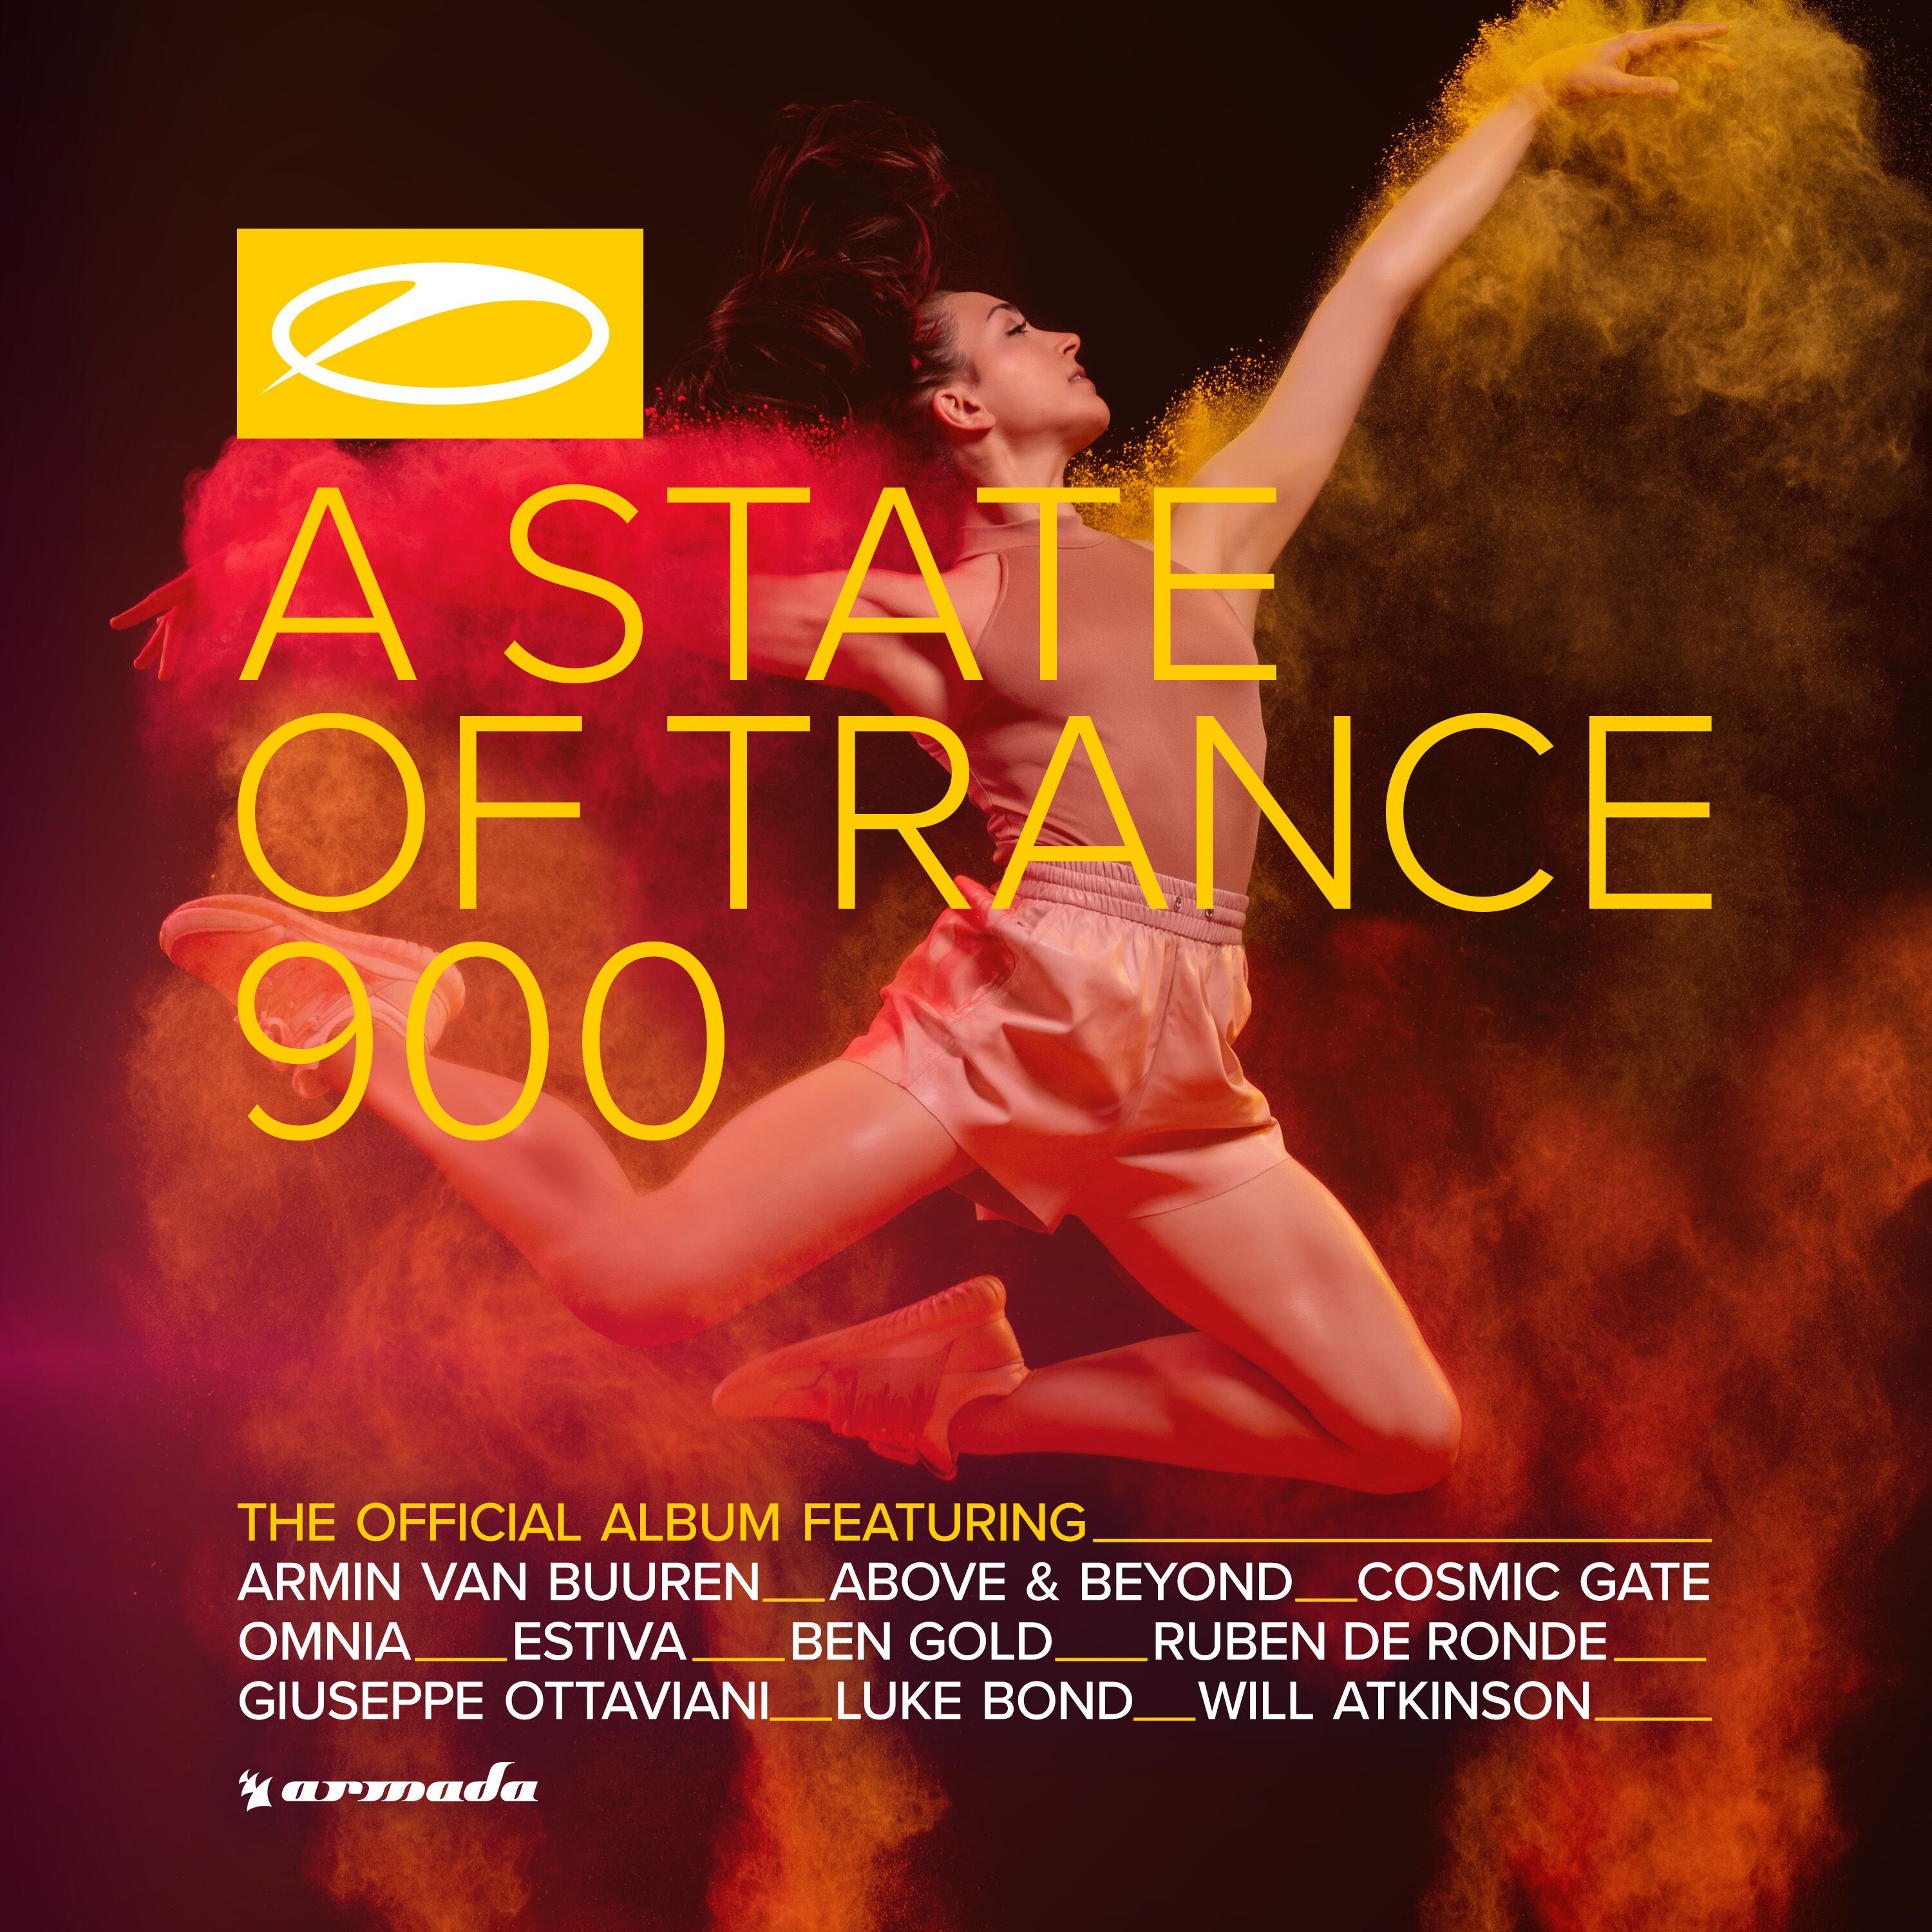 Armin van Buuren presents A State Of Trance 900 (The Official Album) on Armada Music